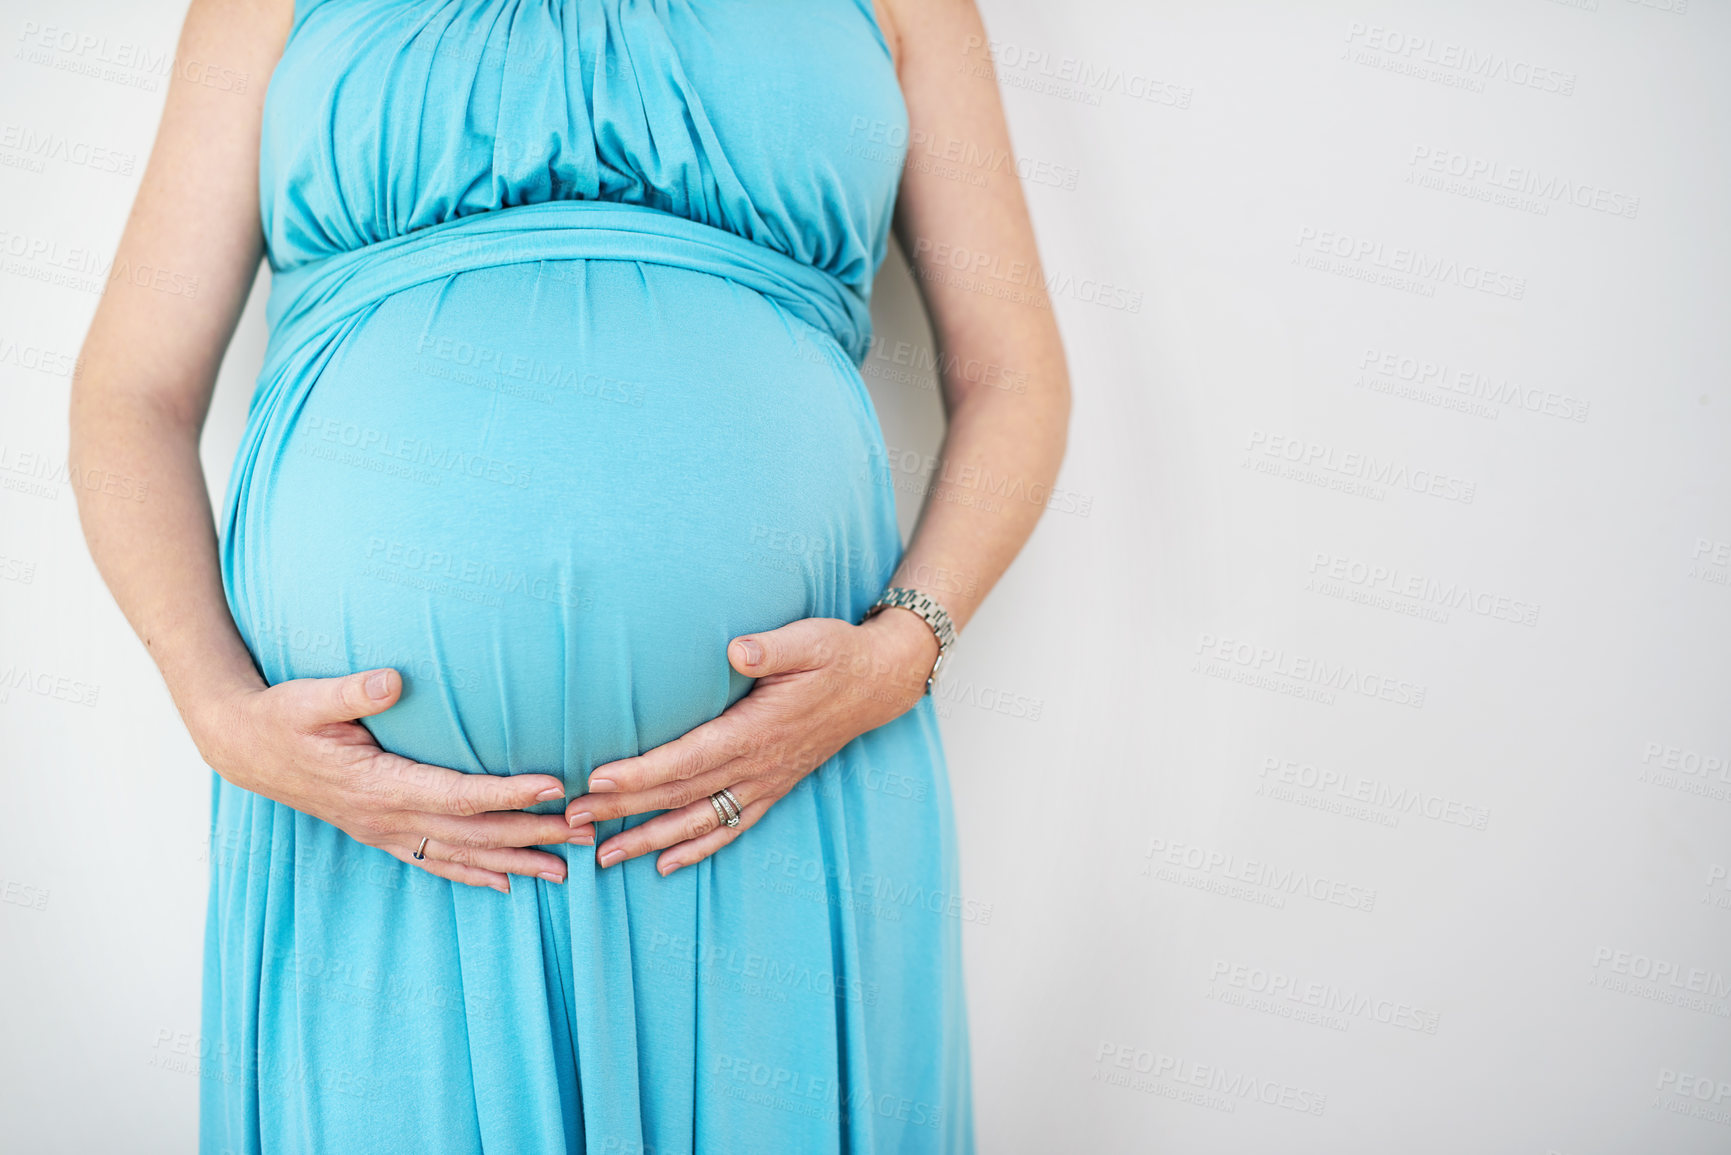 Buy stock photo Shot of an unidentifiable pregnant woman holding her belly against a white background